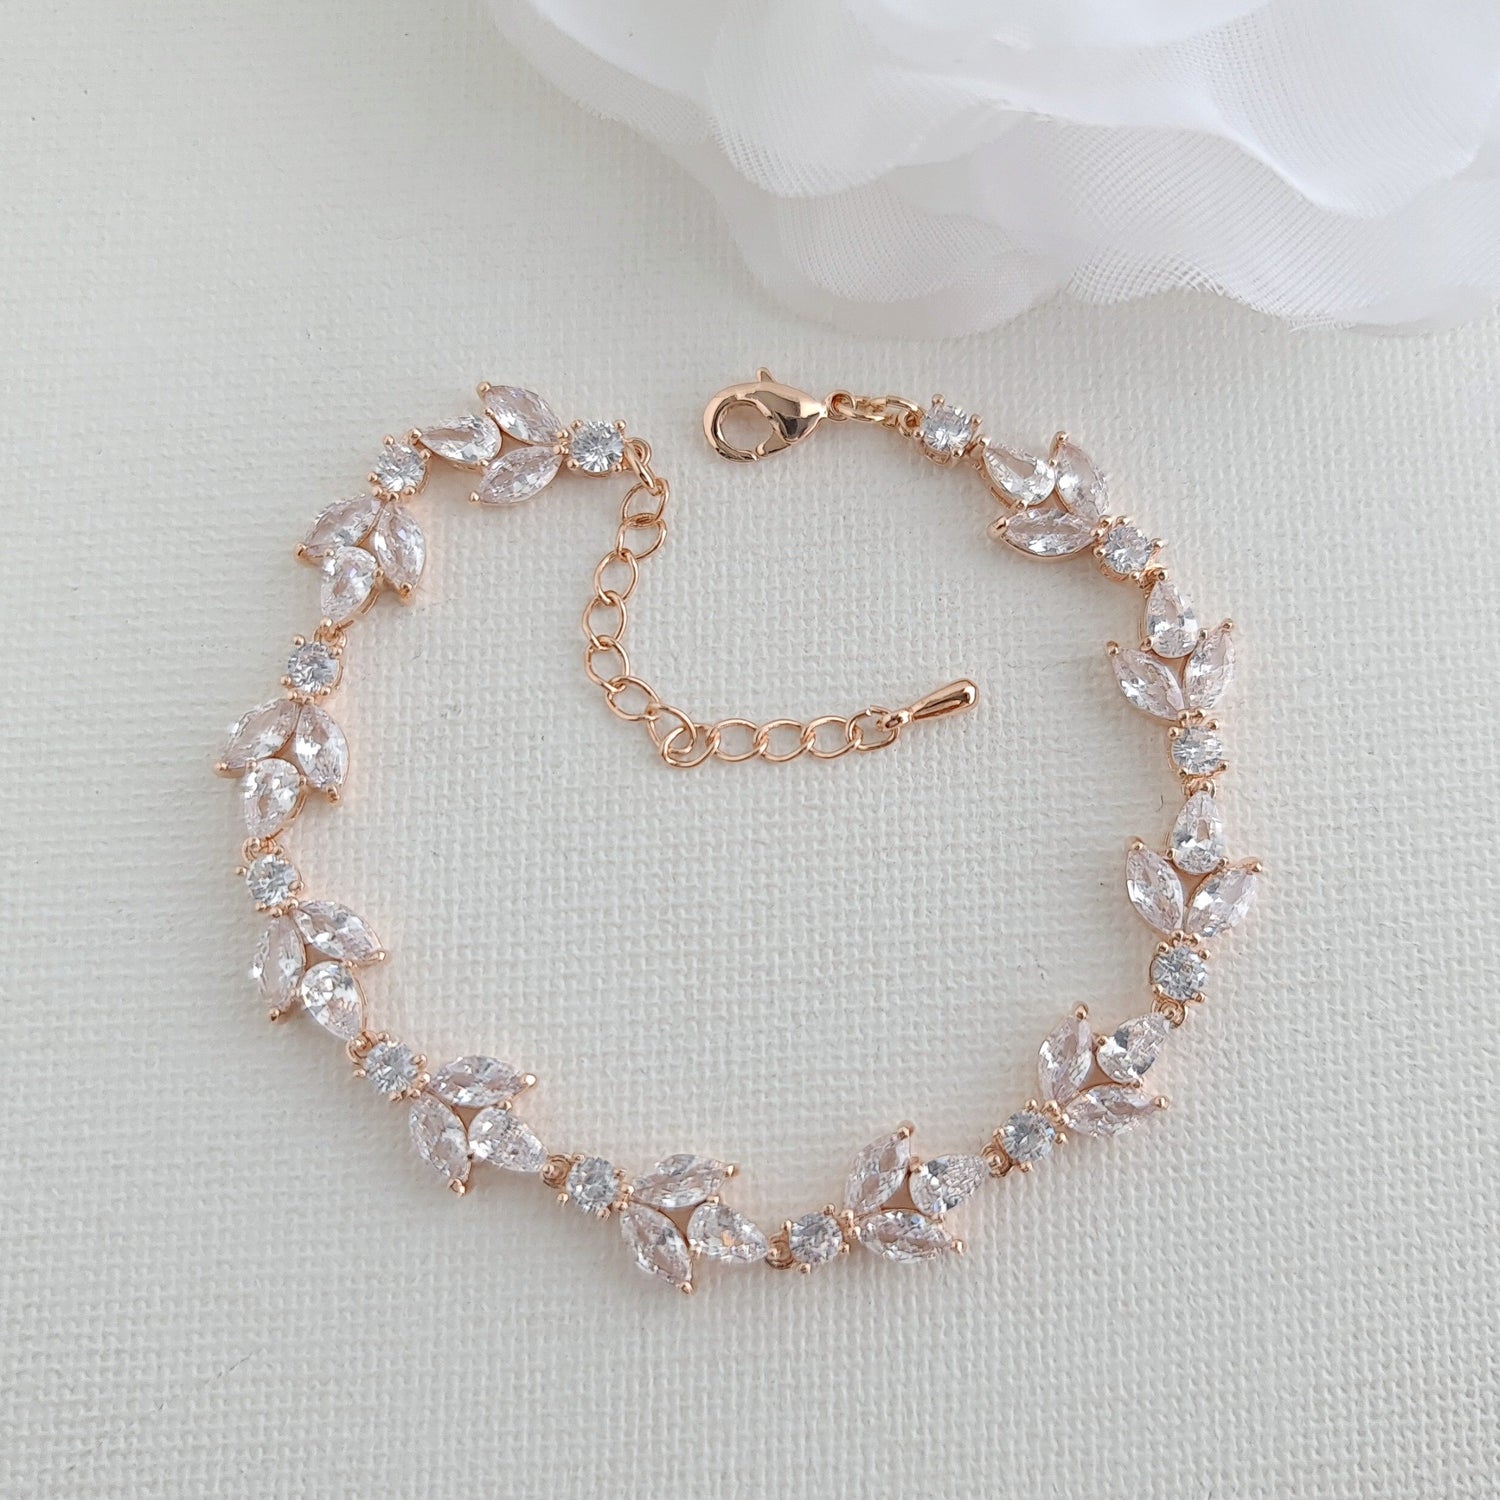 Rose gold bracelet for brides Made of Cubic Zirconia- Poetry Designs